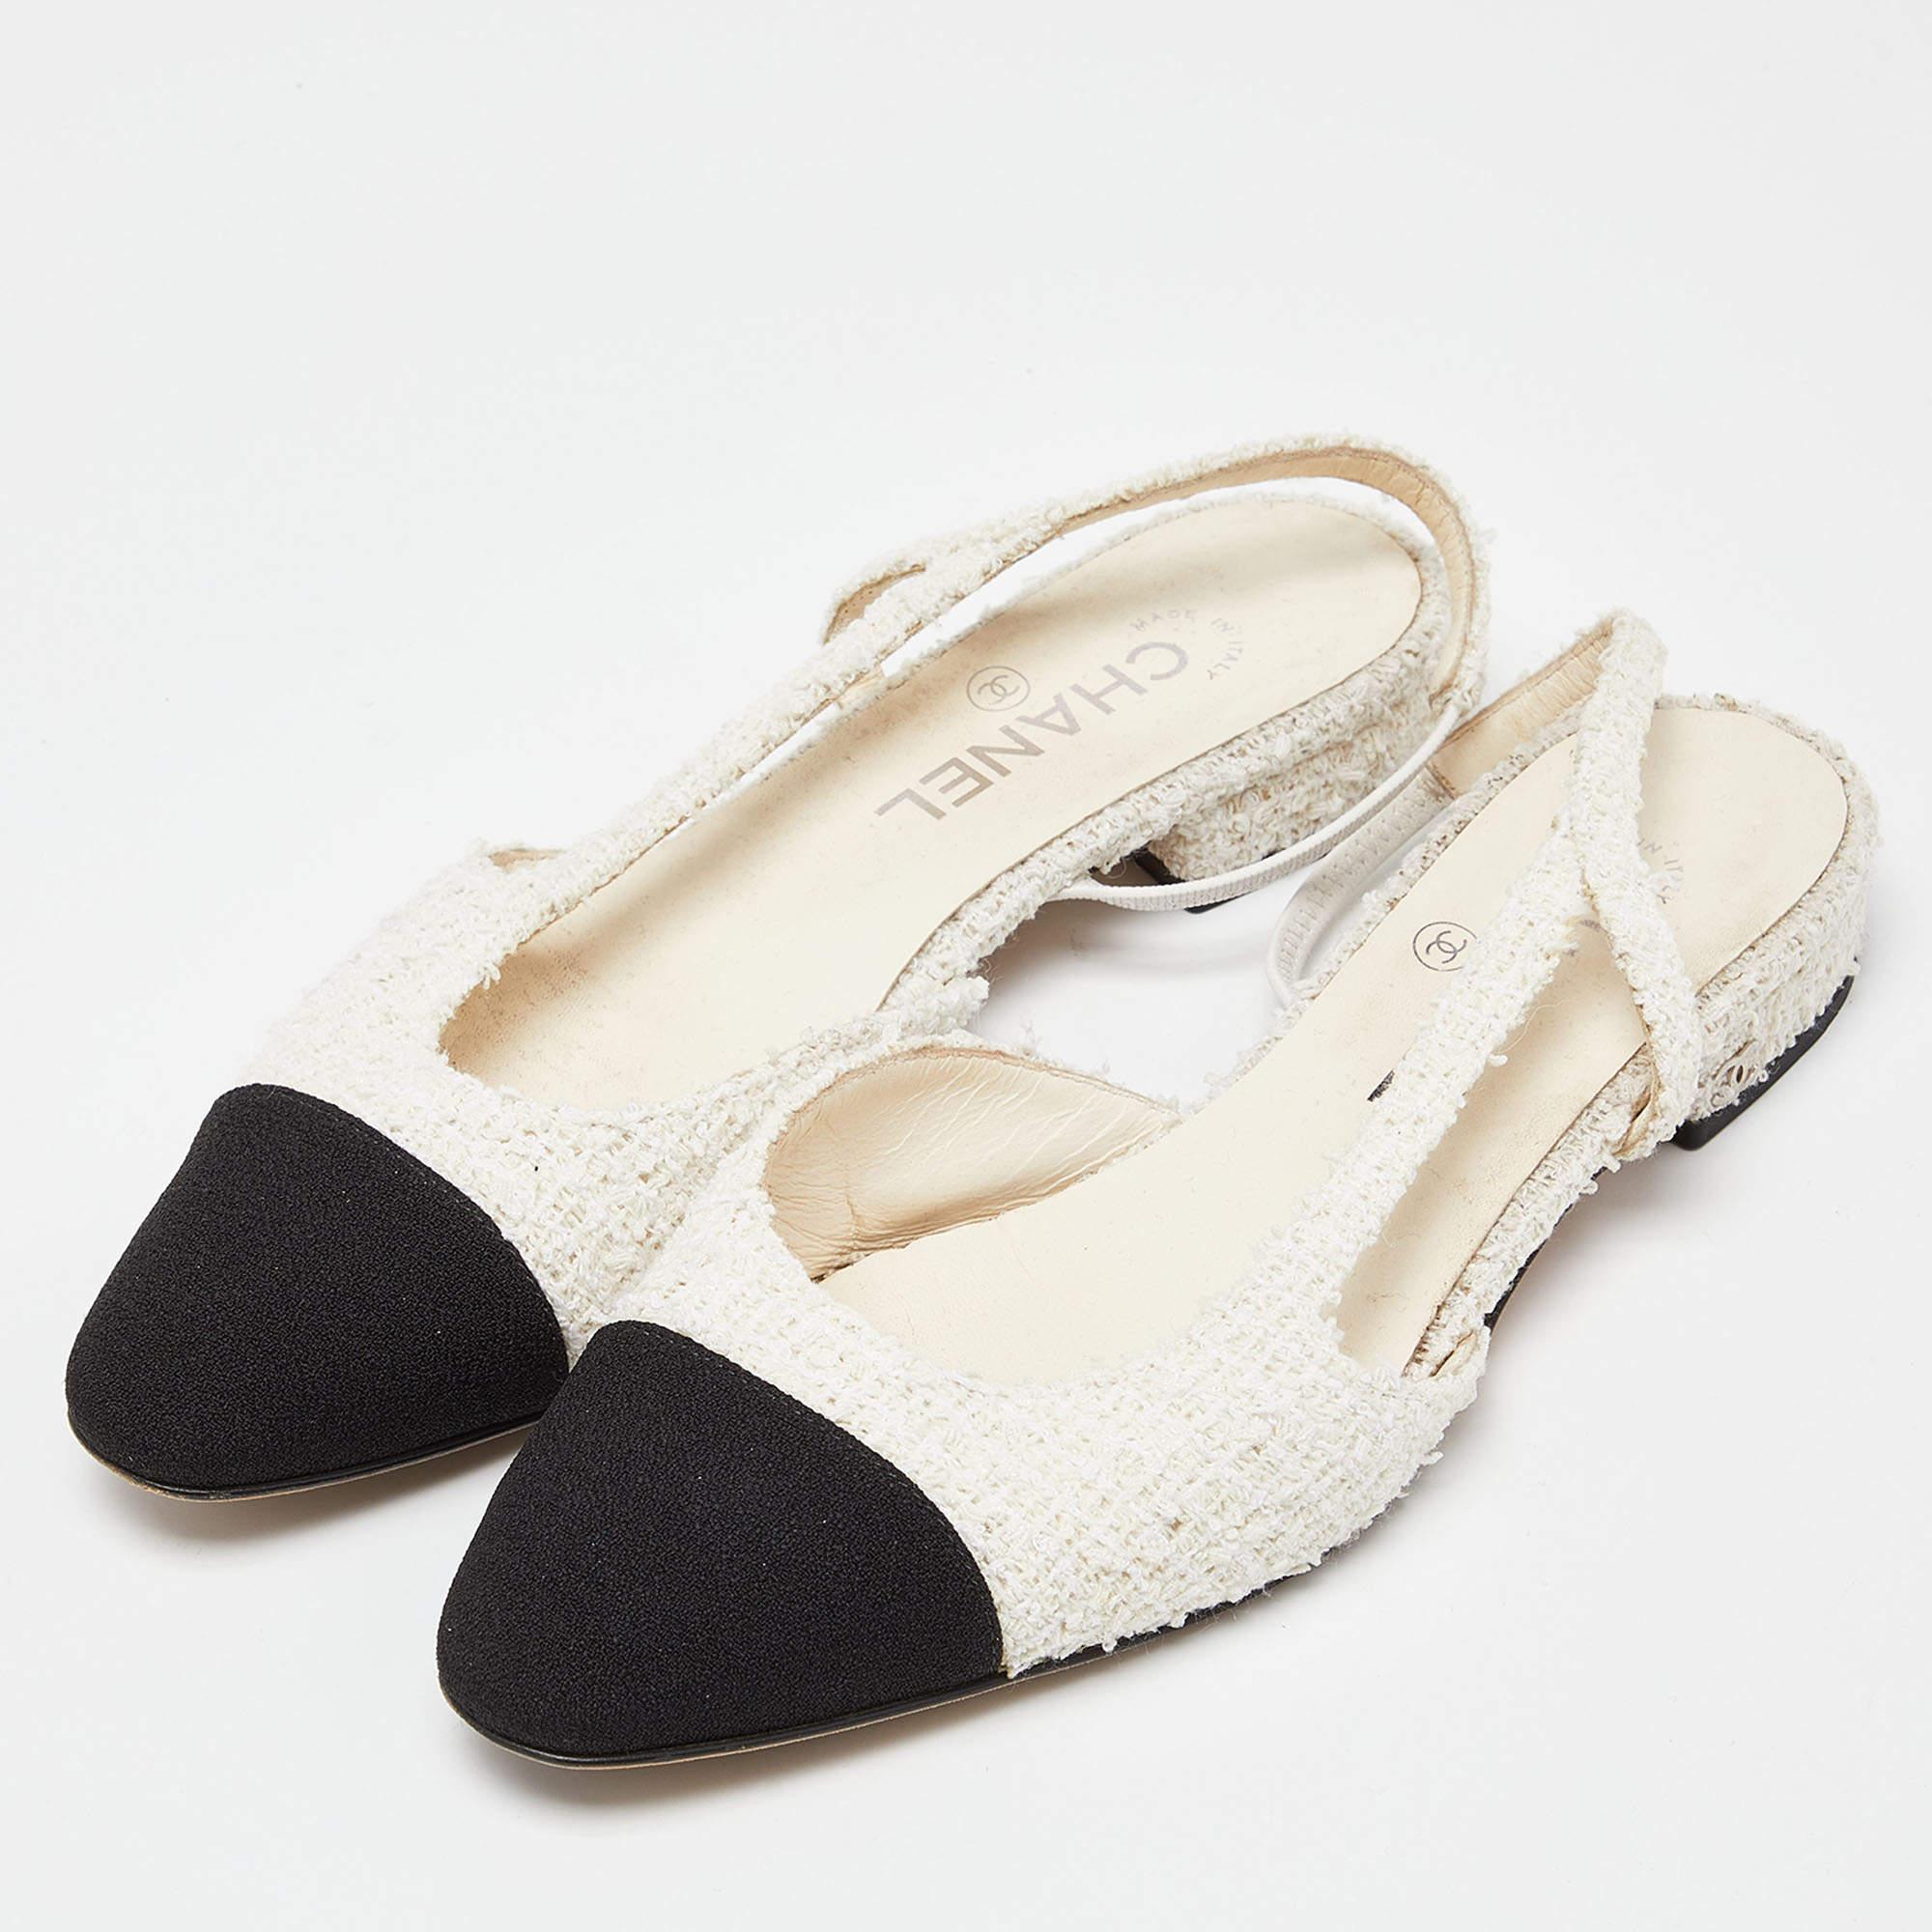 Structured with a minimalist design, these sandals by Chanel are sophisticated and classy. Crafted from tweed and fabric, they feature cap toes along with slingback straps.

Includes: Original Dustbag

